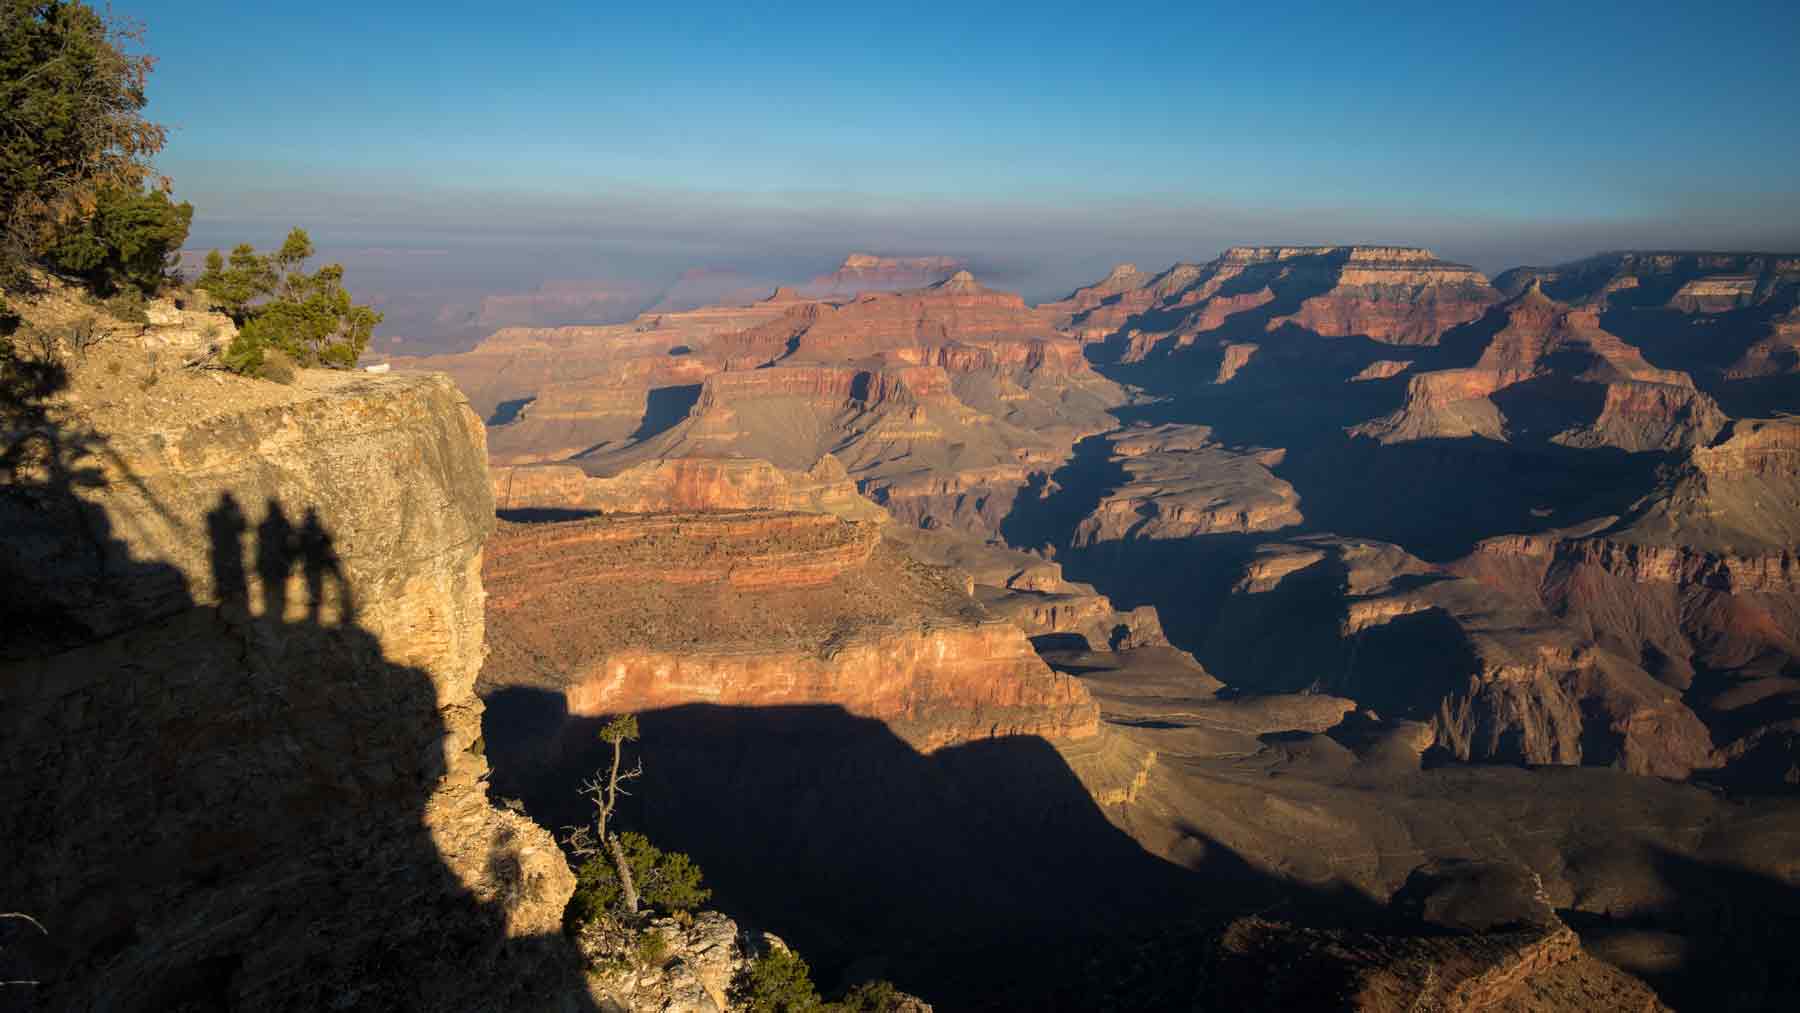 Shadows of the three sisters in the early morning in the Grand Canyon